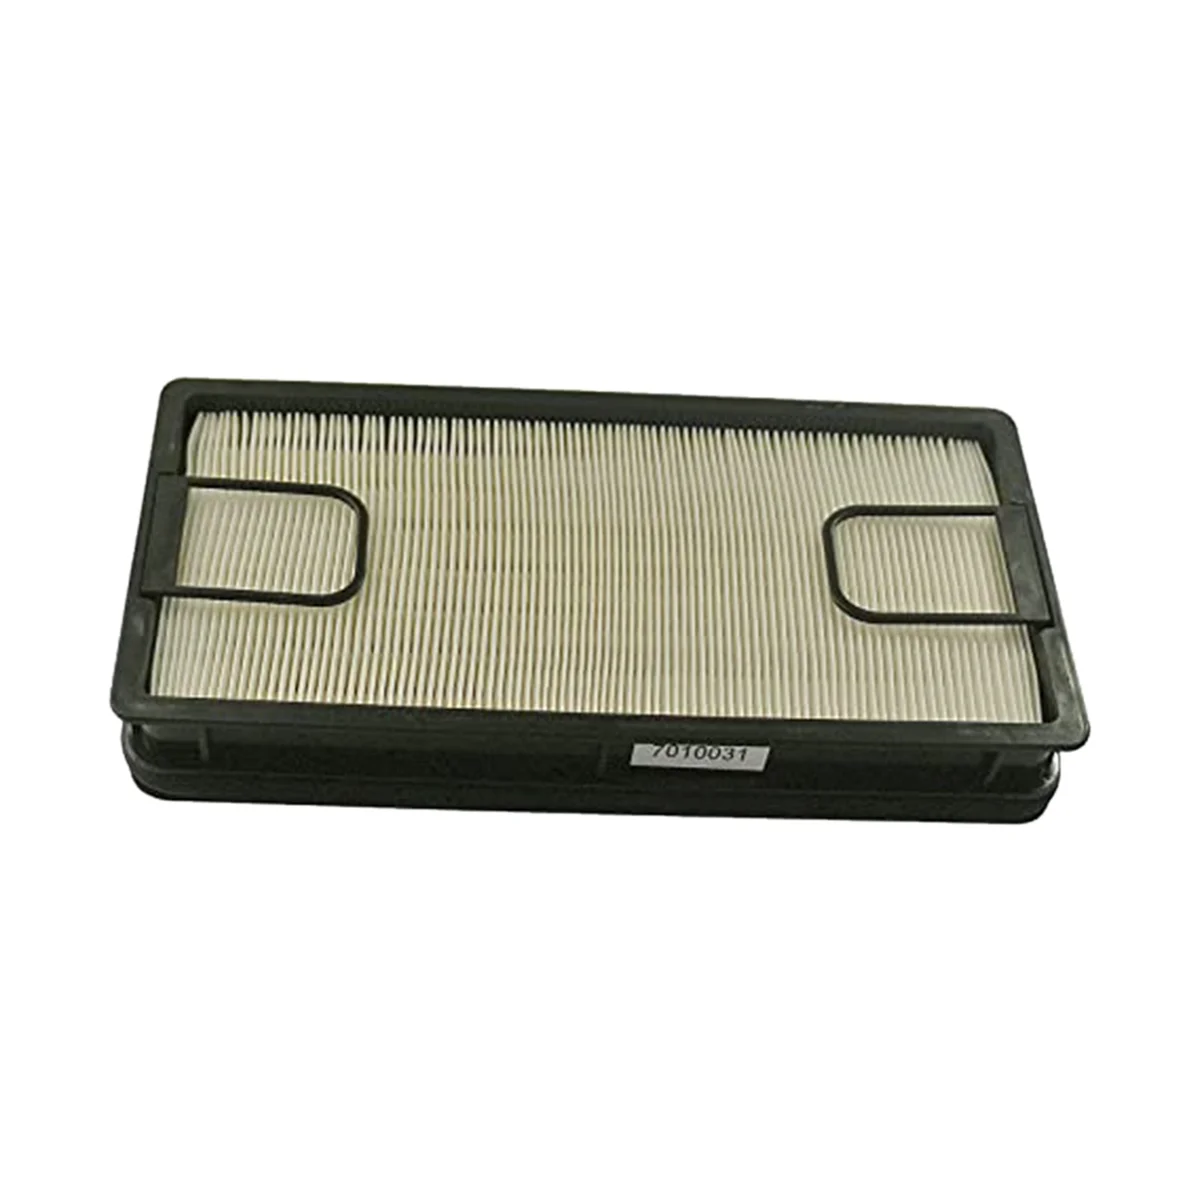 

Replaces Air Filter Kits for Bobcat Loader S740 S750 S770 S850 T740 T750 T770 7010030 7010031 PA31010 PA31011